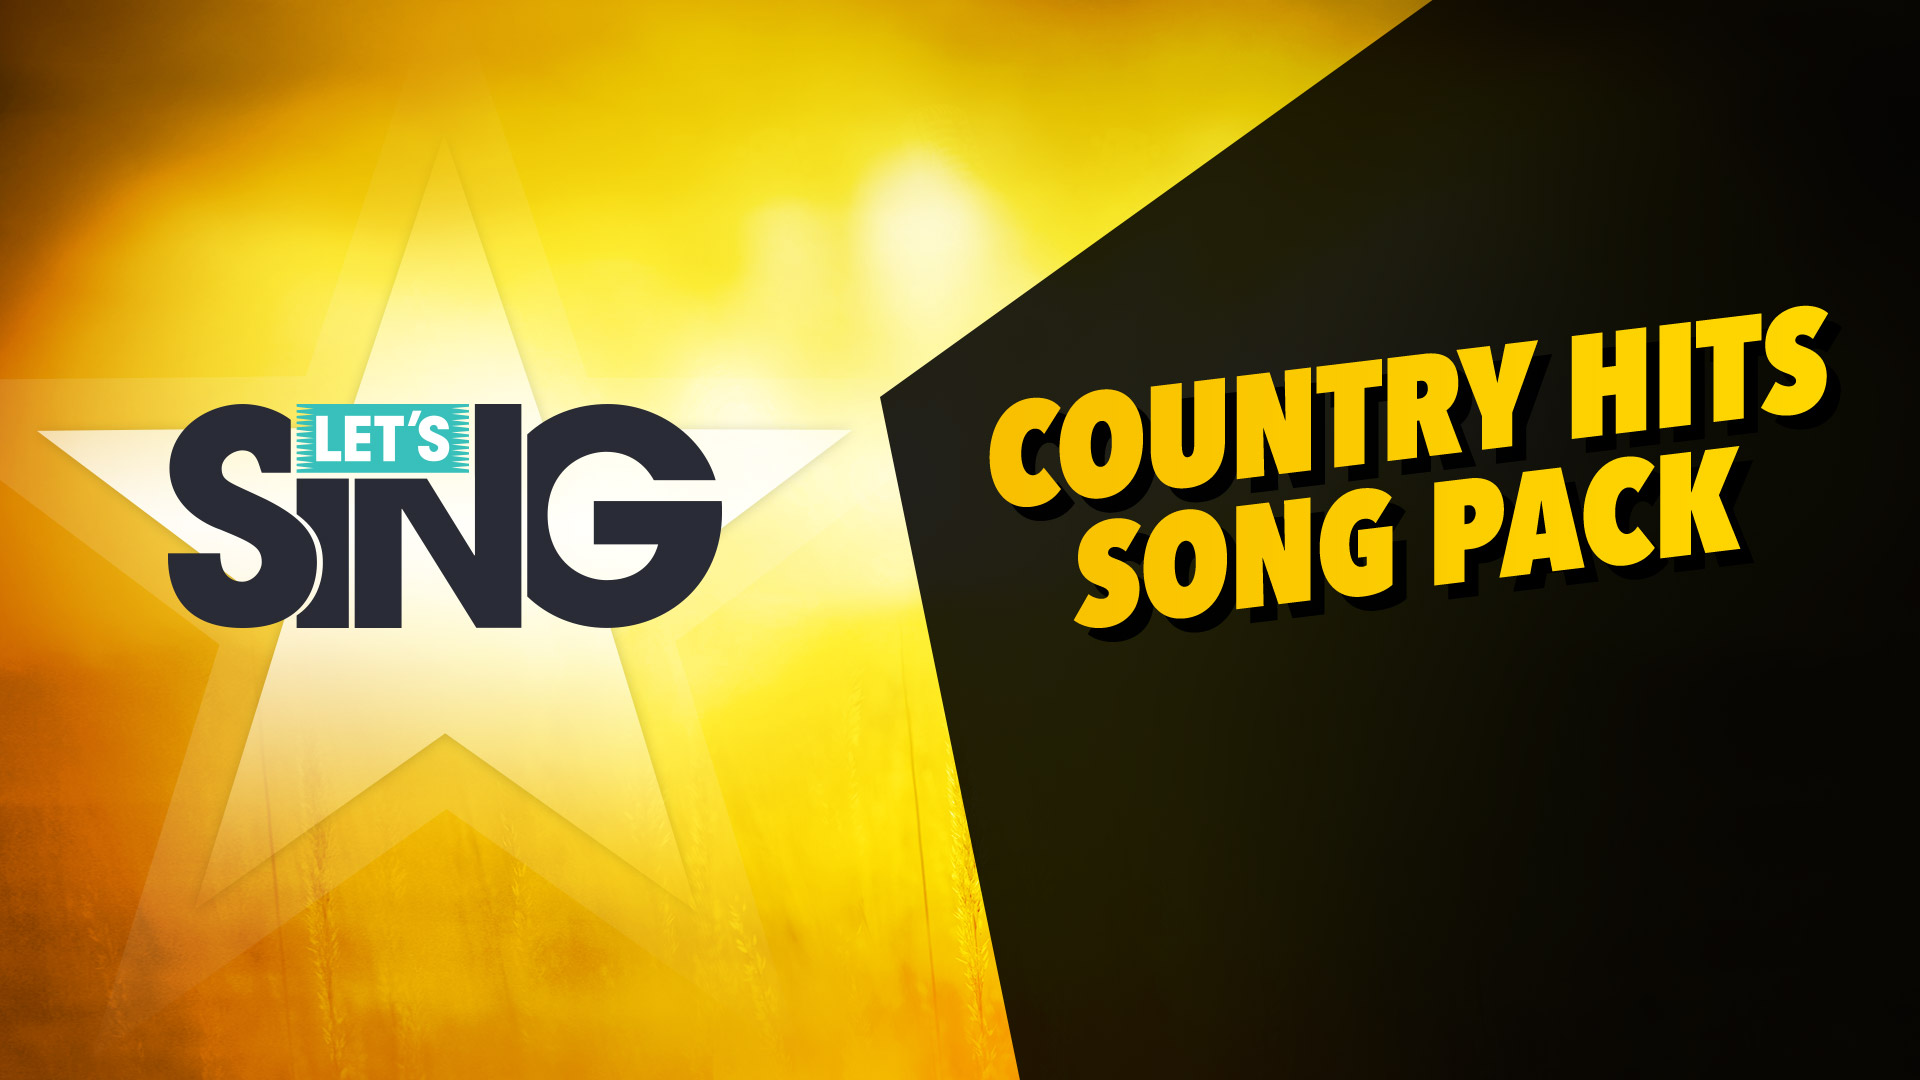 Let's Sing - Country Hits Song Pack